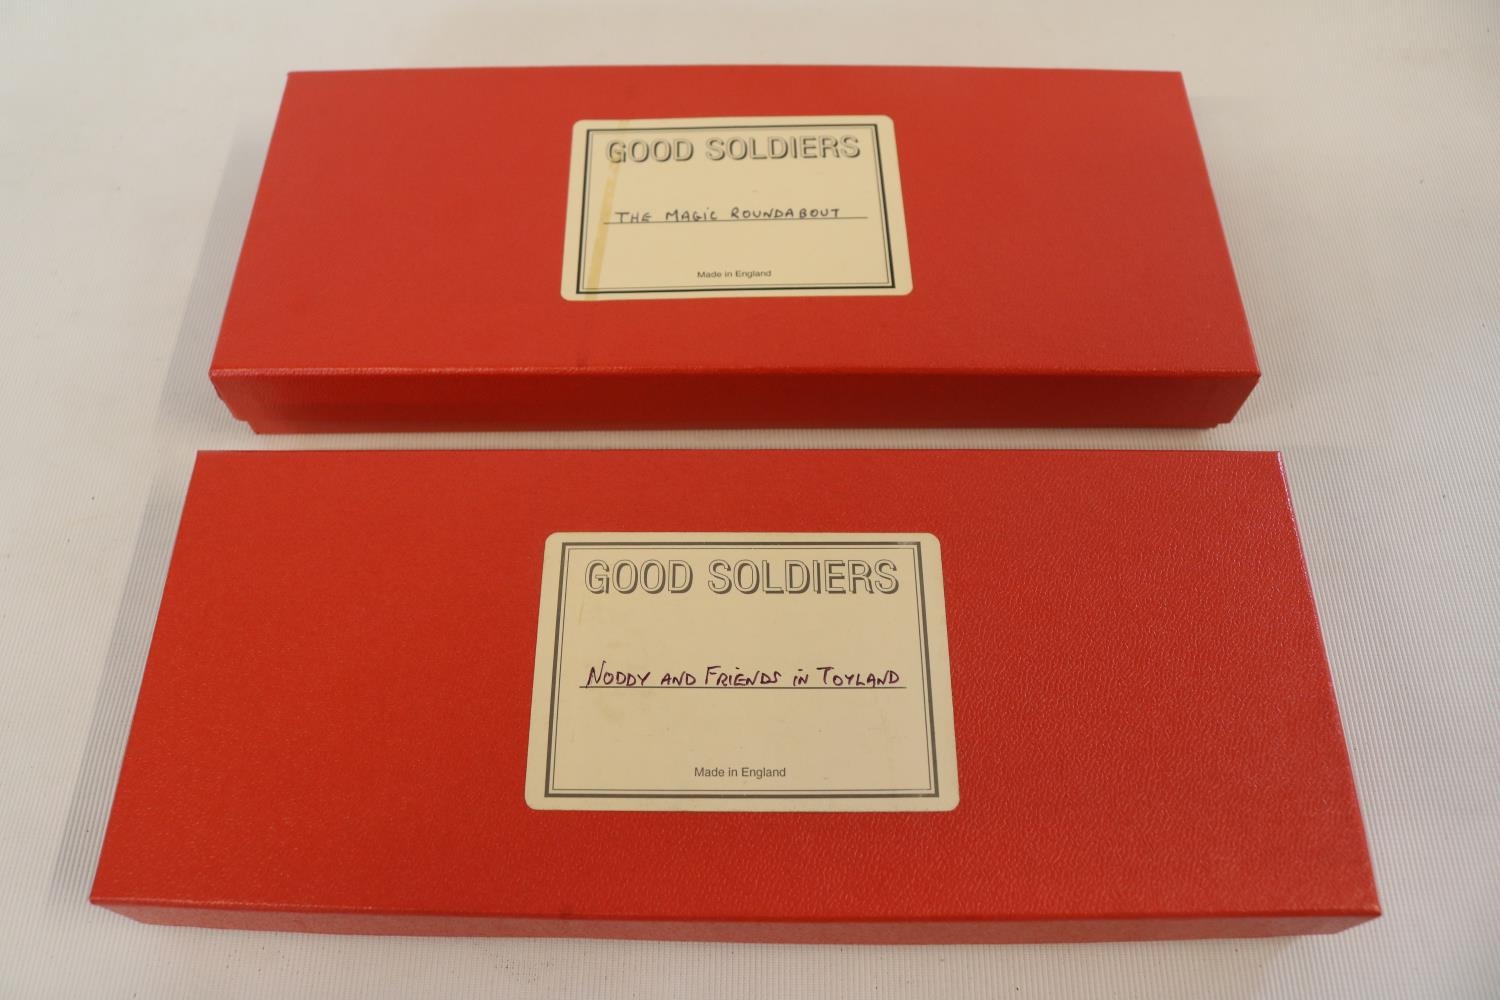 Boxed Good Soldiers 'The Magic Roundabout' & 'Noddy and Friends Toyland' Made in England Cold - Image 3 of 3